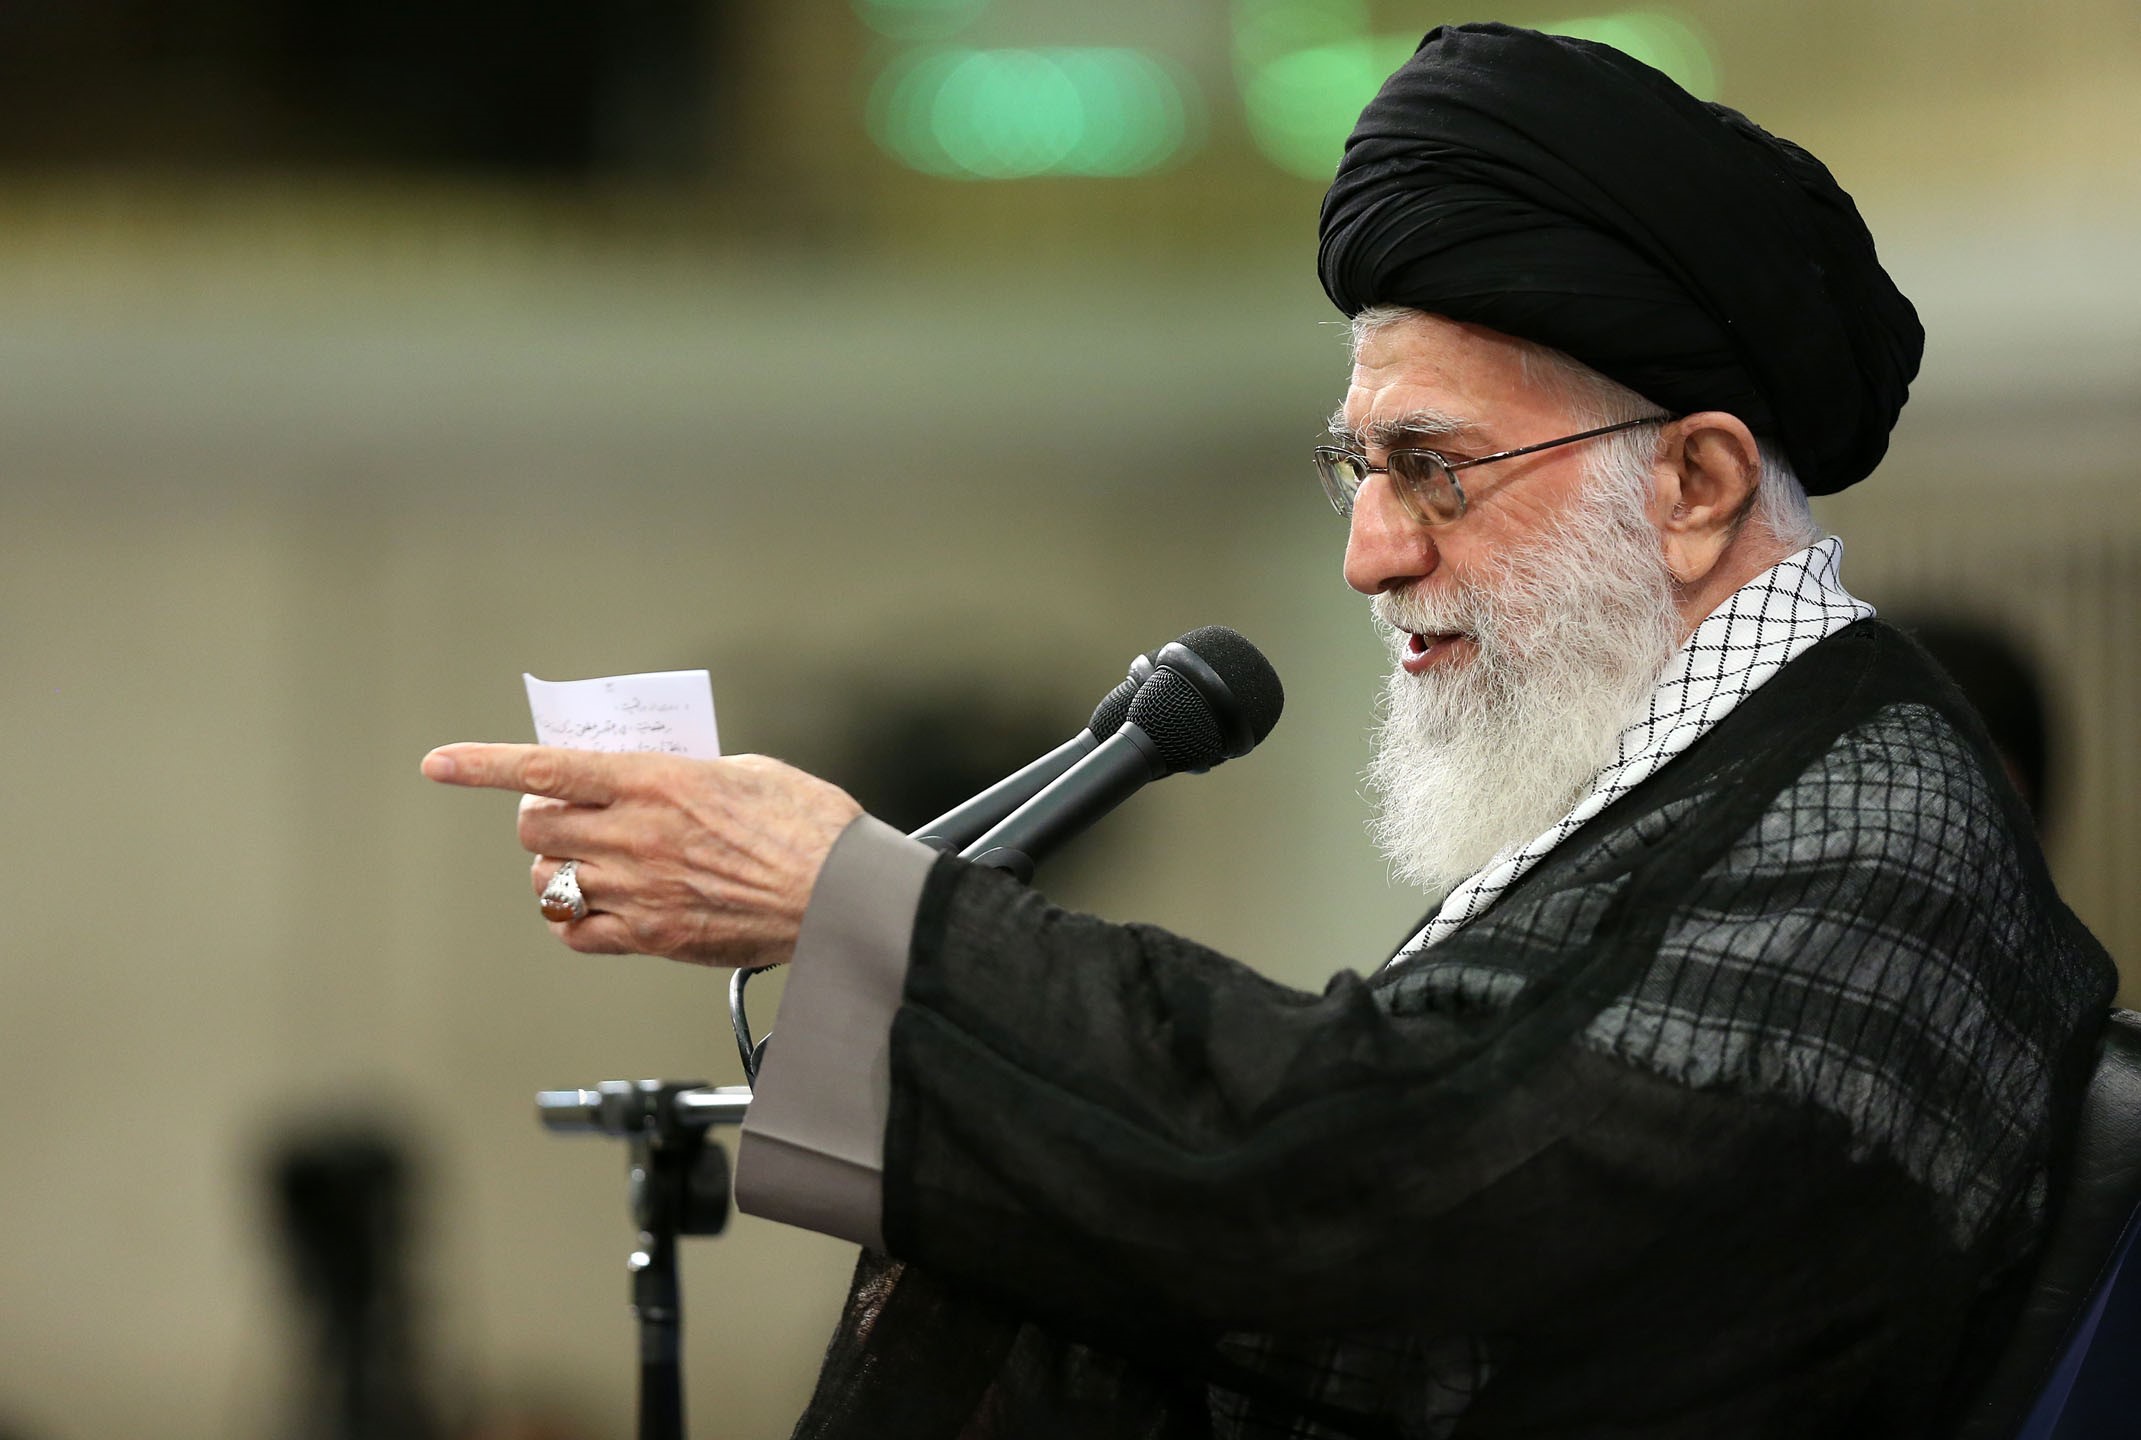 Iranian supreme leader Ayatollah Ali Khamenei delivers a speech during an Islamic Revolution Guards Corps meeting in Tehran, Iran on Sept. 18, 2016.